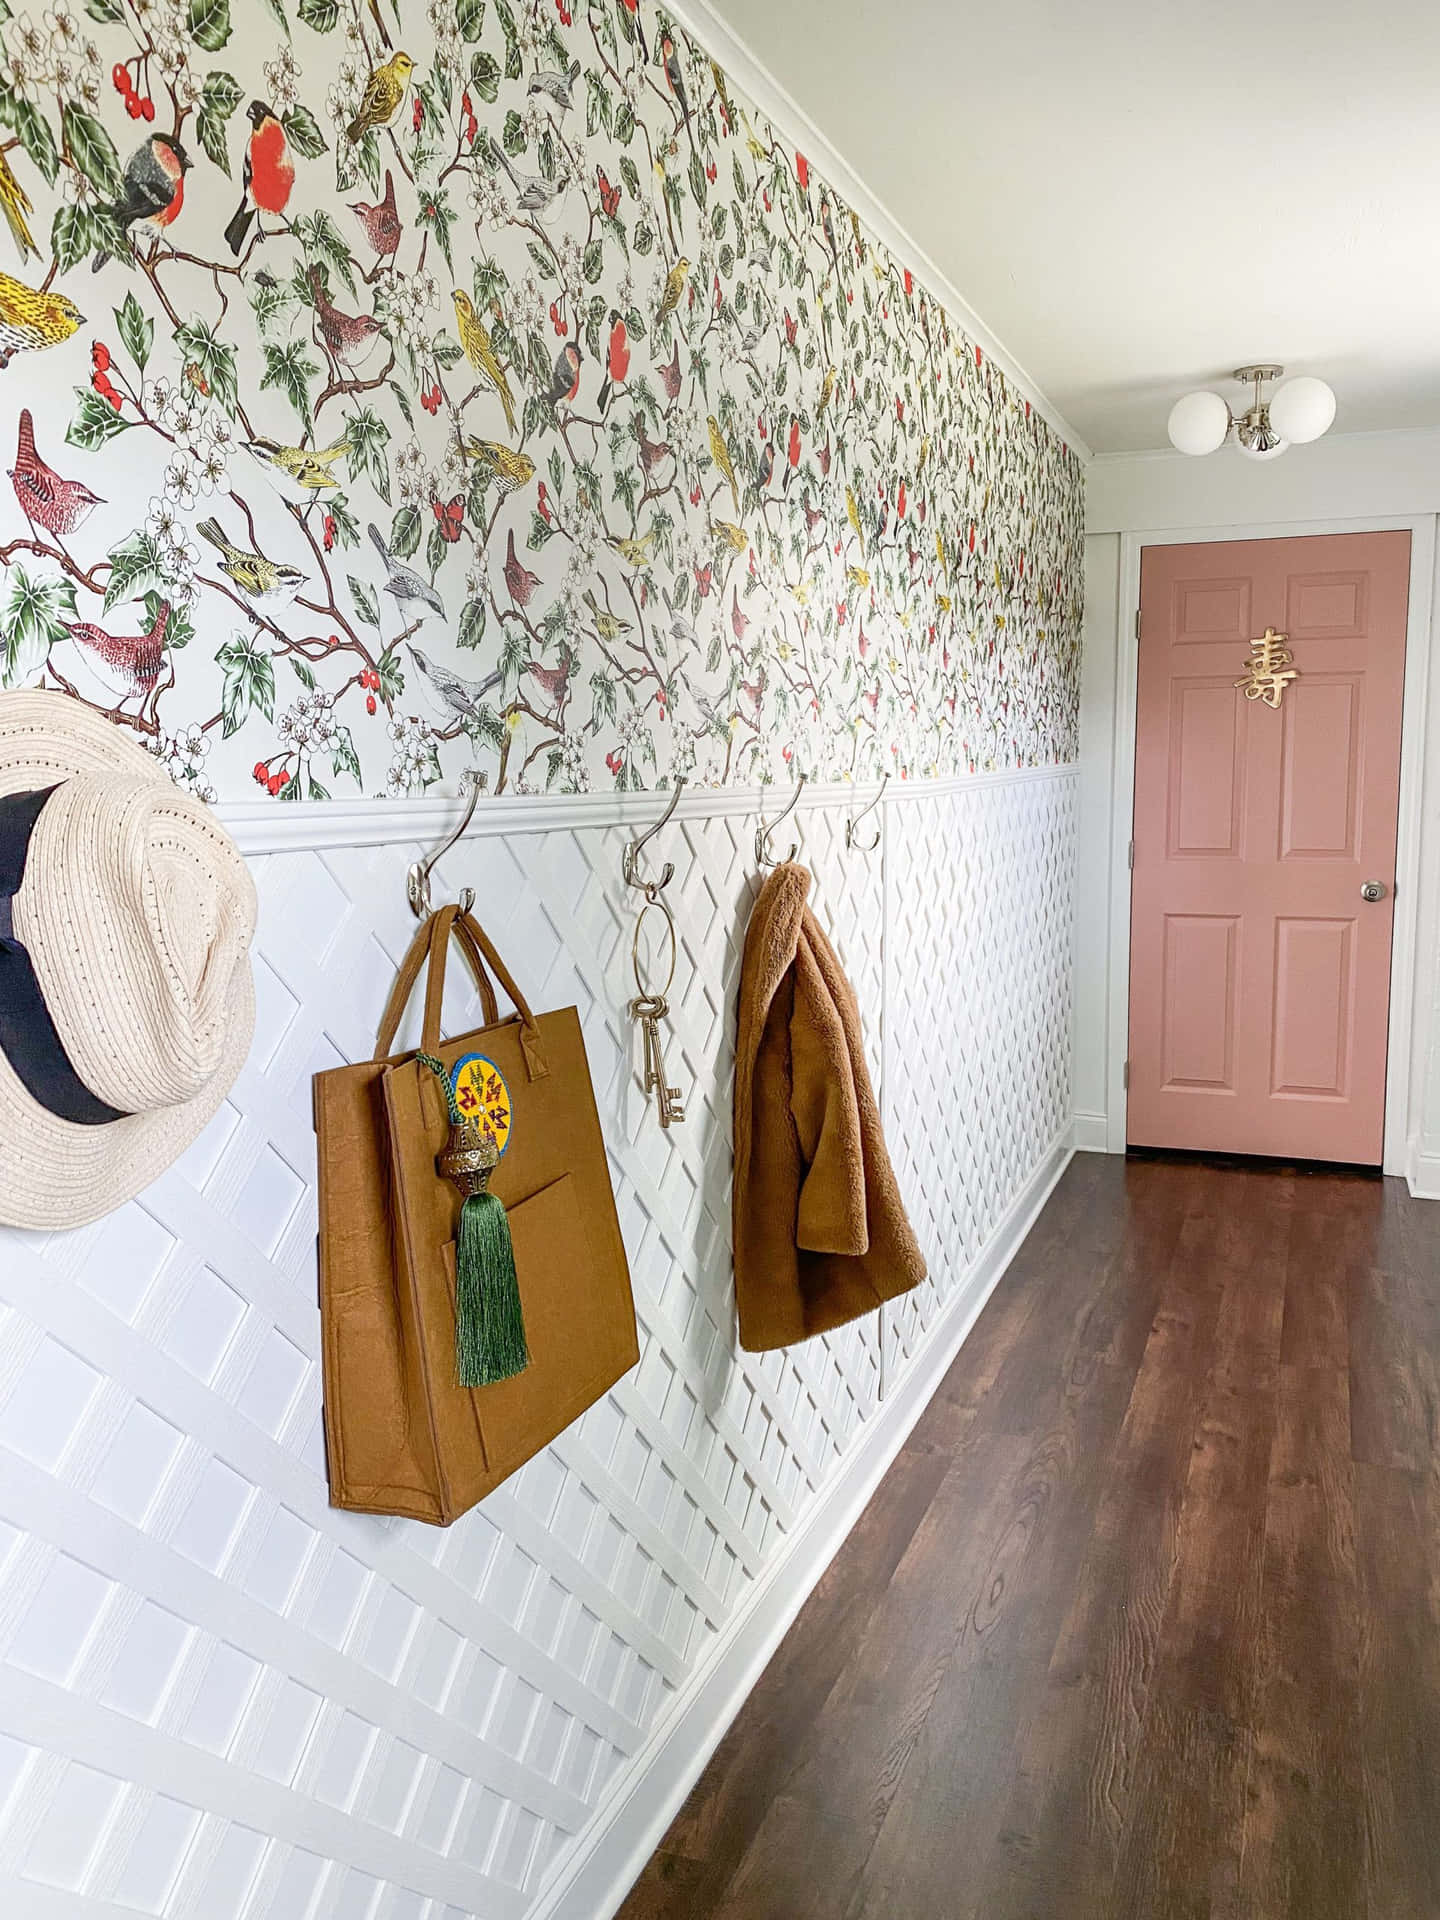 A Hallway With A Pink Coat Rack And A Pink Purse